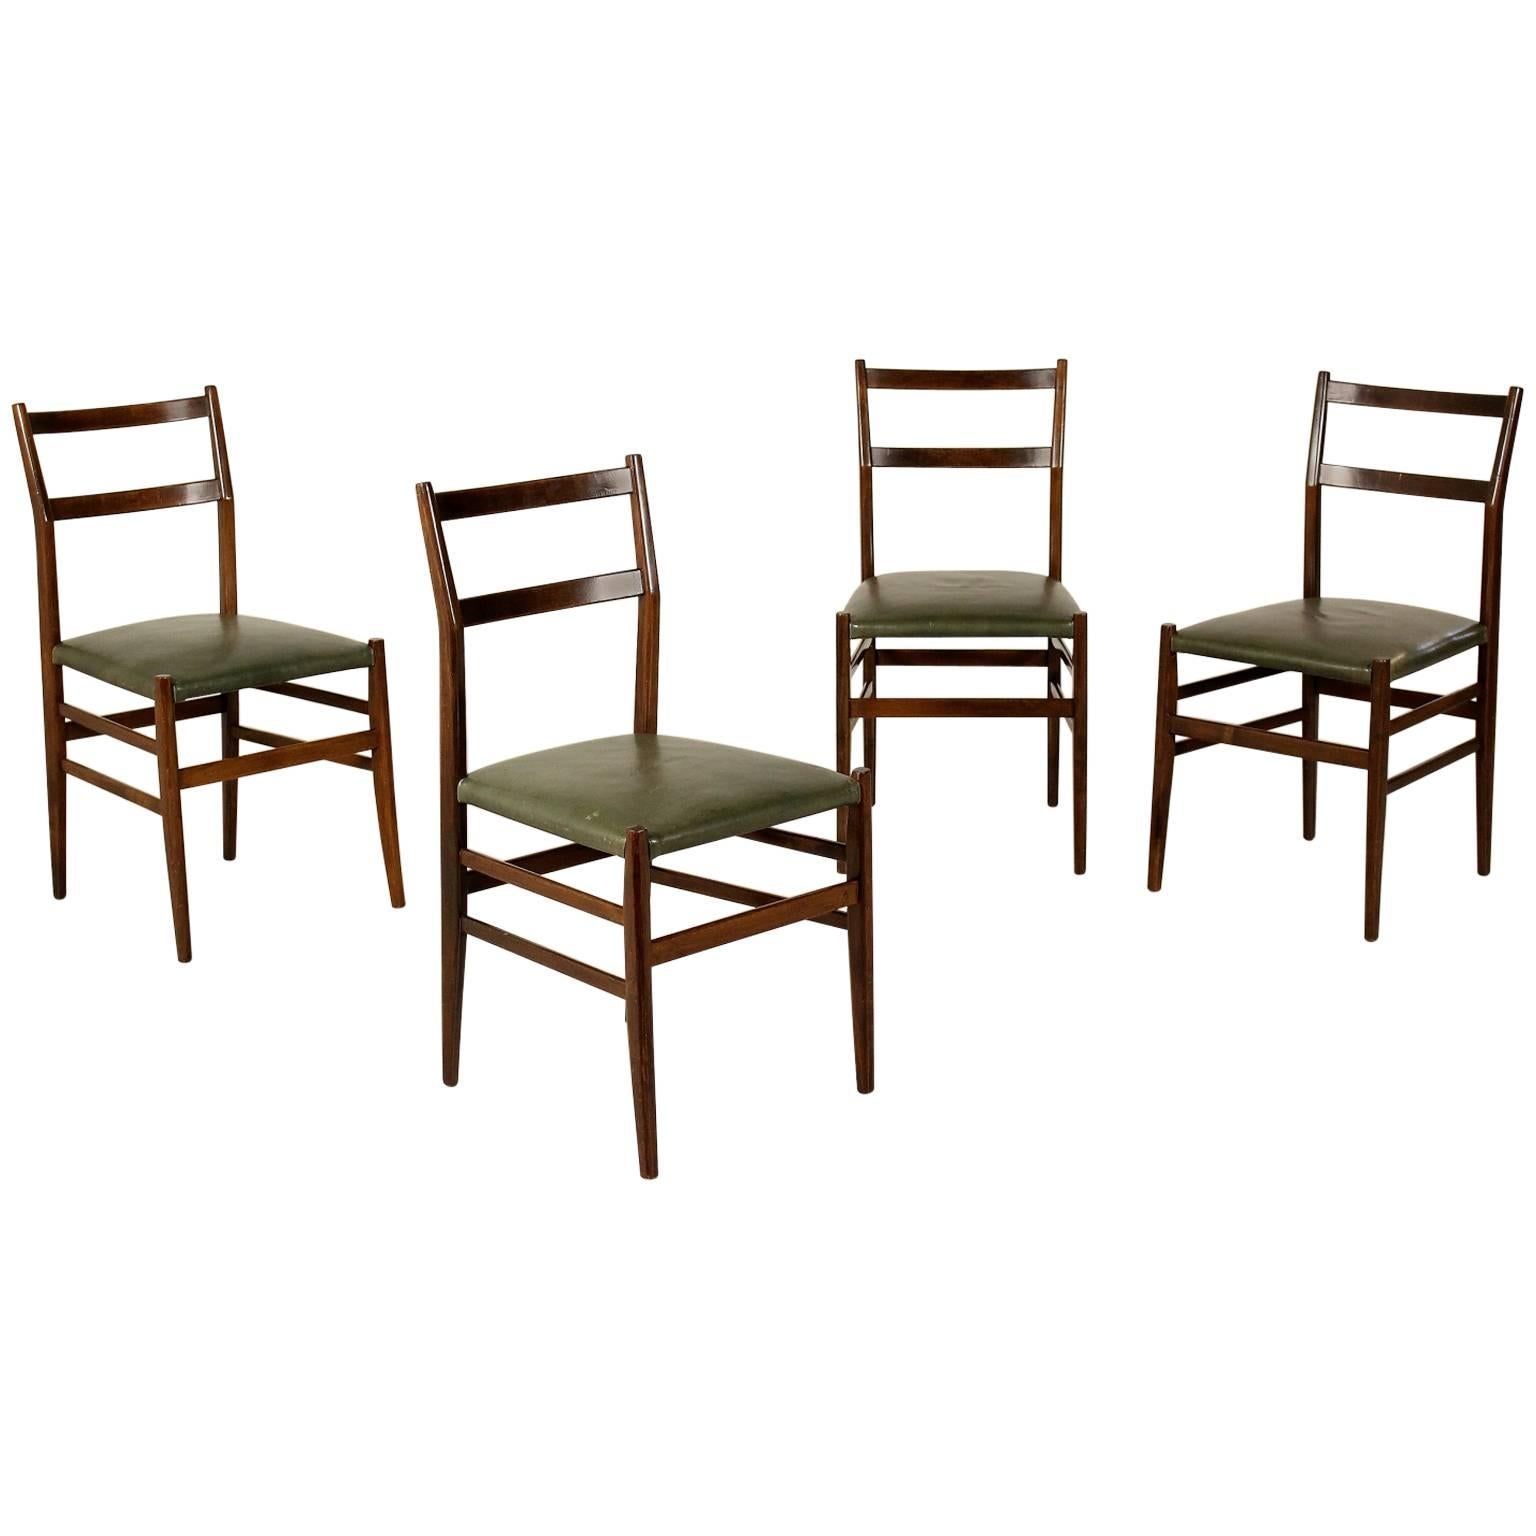 Group Four Chairs by Gio Ponti Stained Ash Wood Leatherette Seat, Italy, 1950s